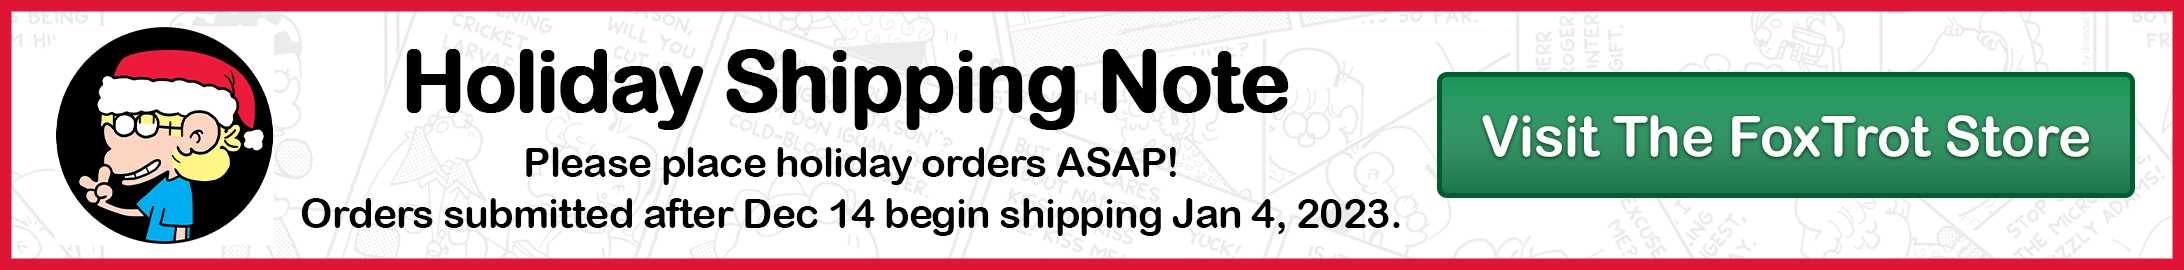 Holiday Shipping Note - Please place holiday orders ASAP! Orders submitted after Dec 14 begin shipping Jan 4, 2023.